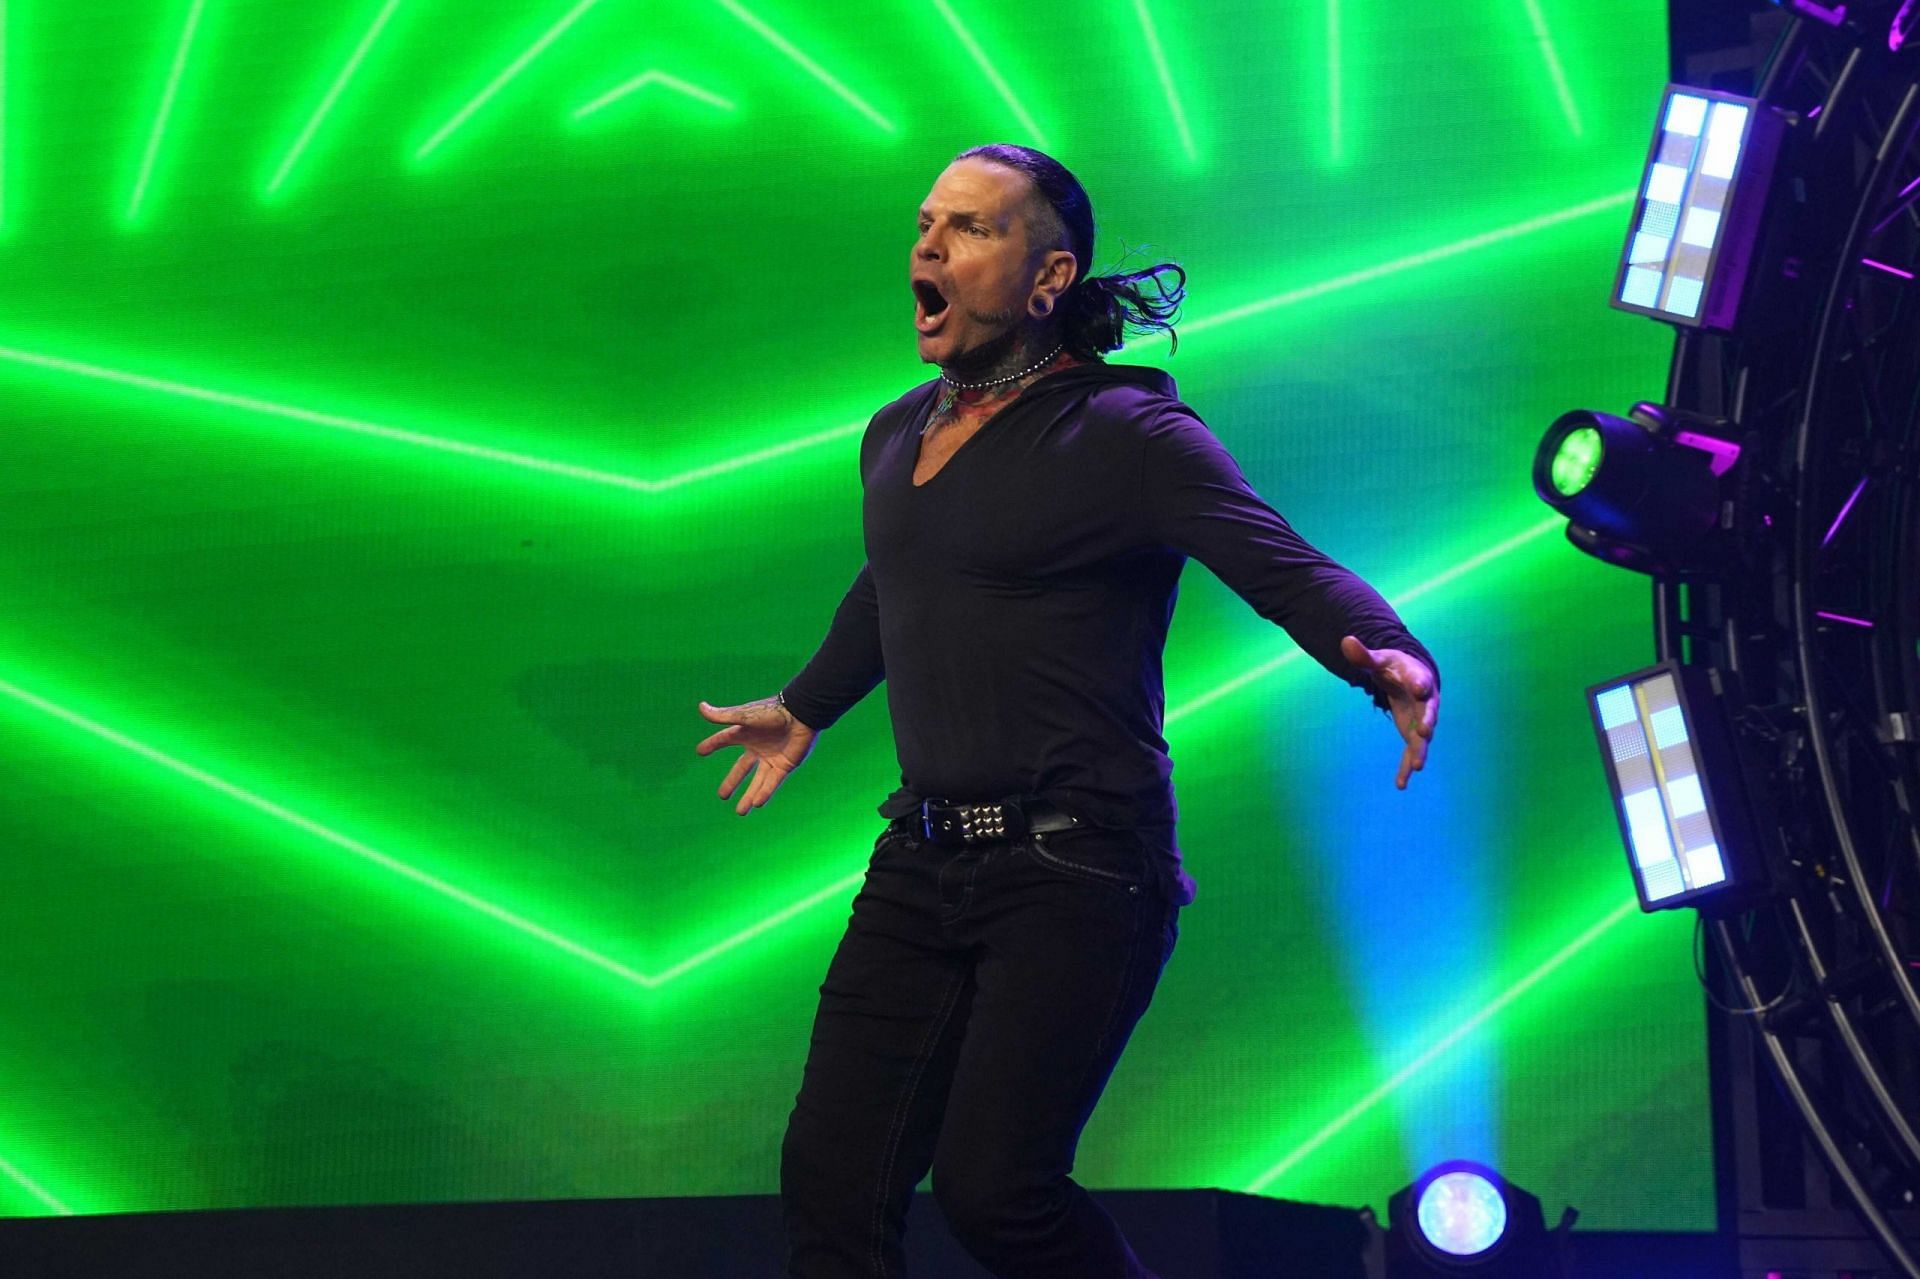 Jeff Hardy recently made his in-ring debut for AEW